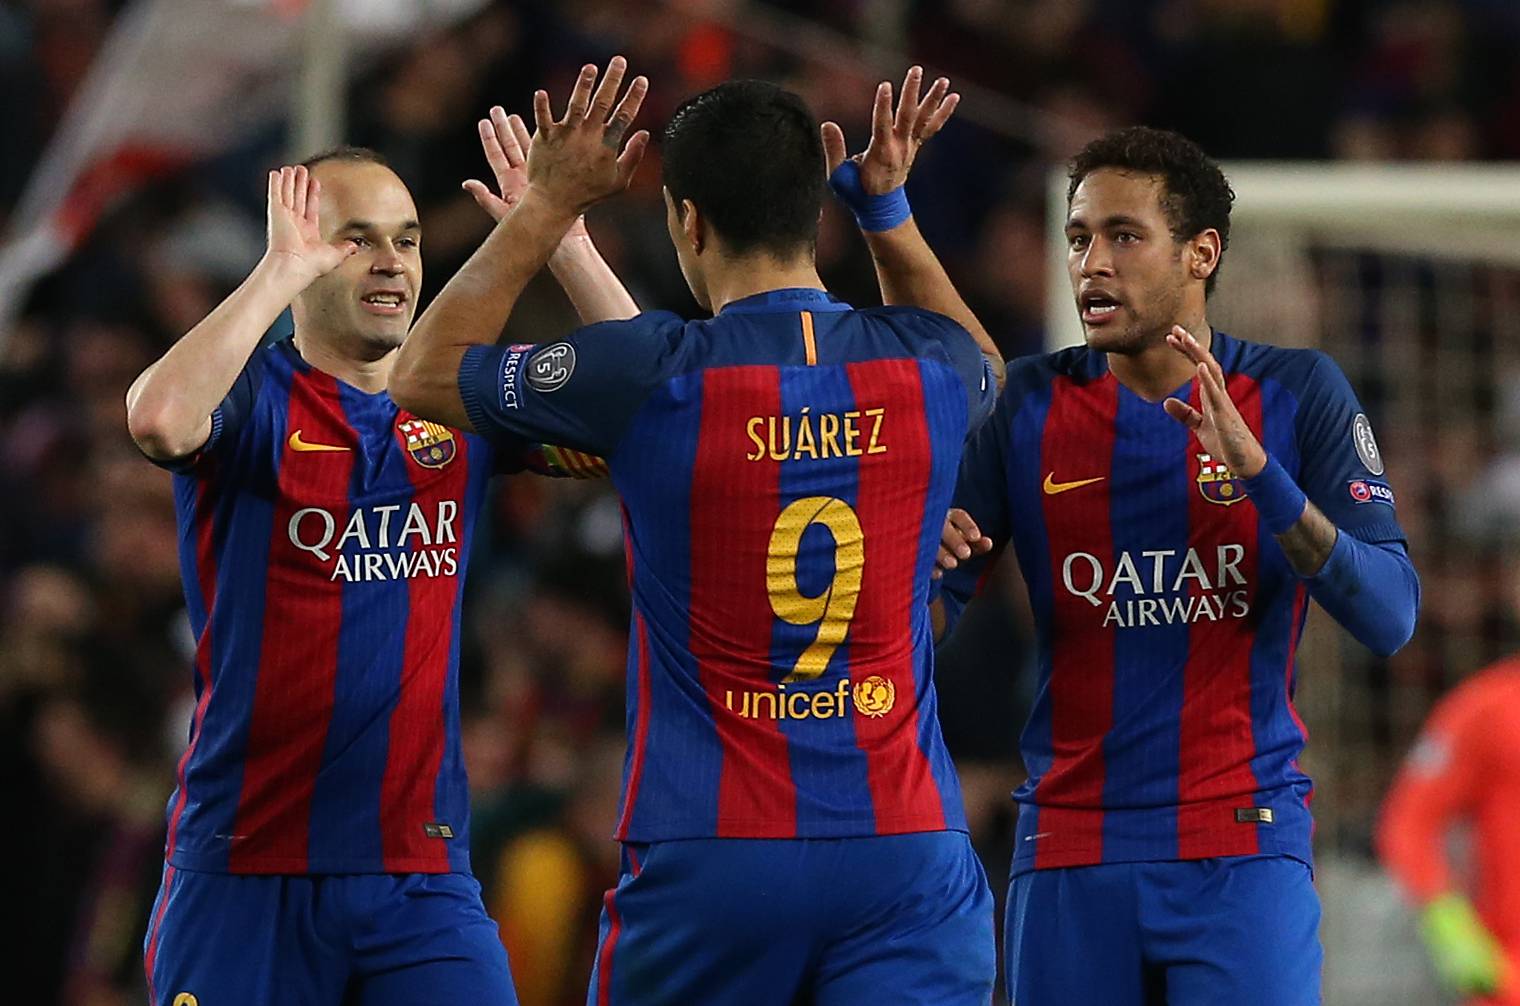 Barcelona's Andres Iniesta celebrates with Luis Suarez and Neymar after Paris Saint-Germain's Layvin Kurzawa scored an own goal and their second goal